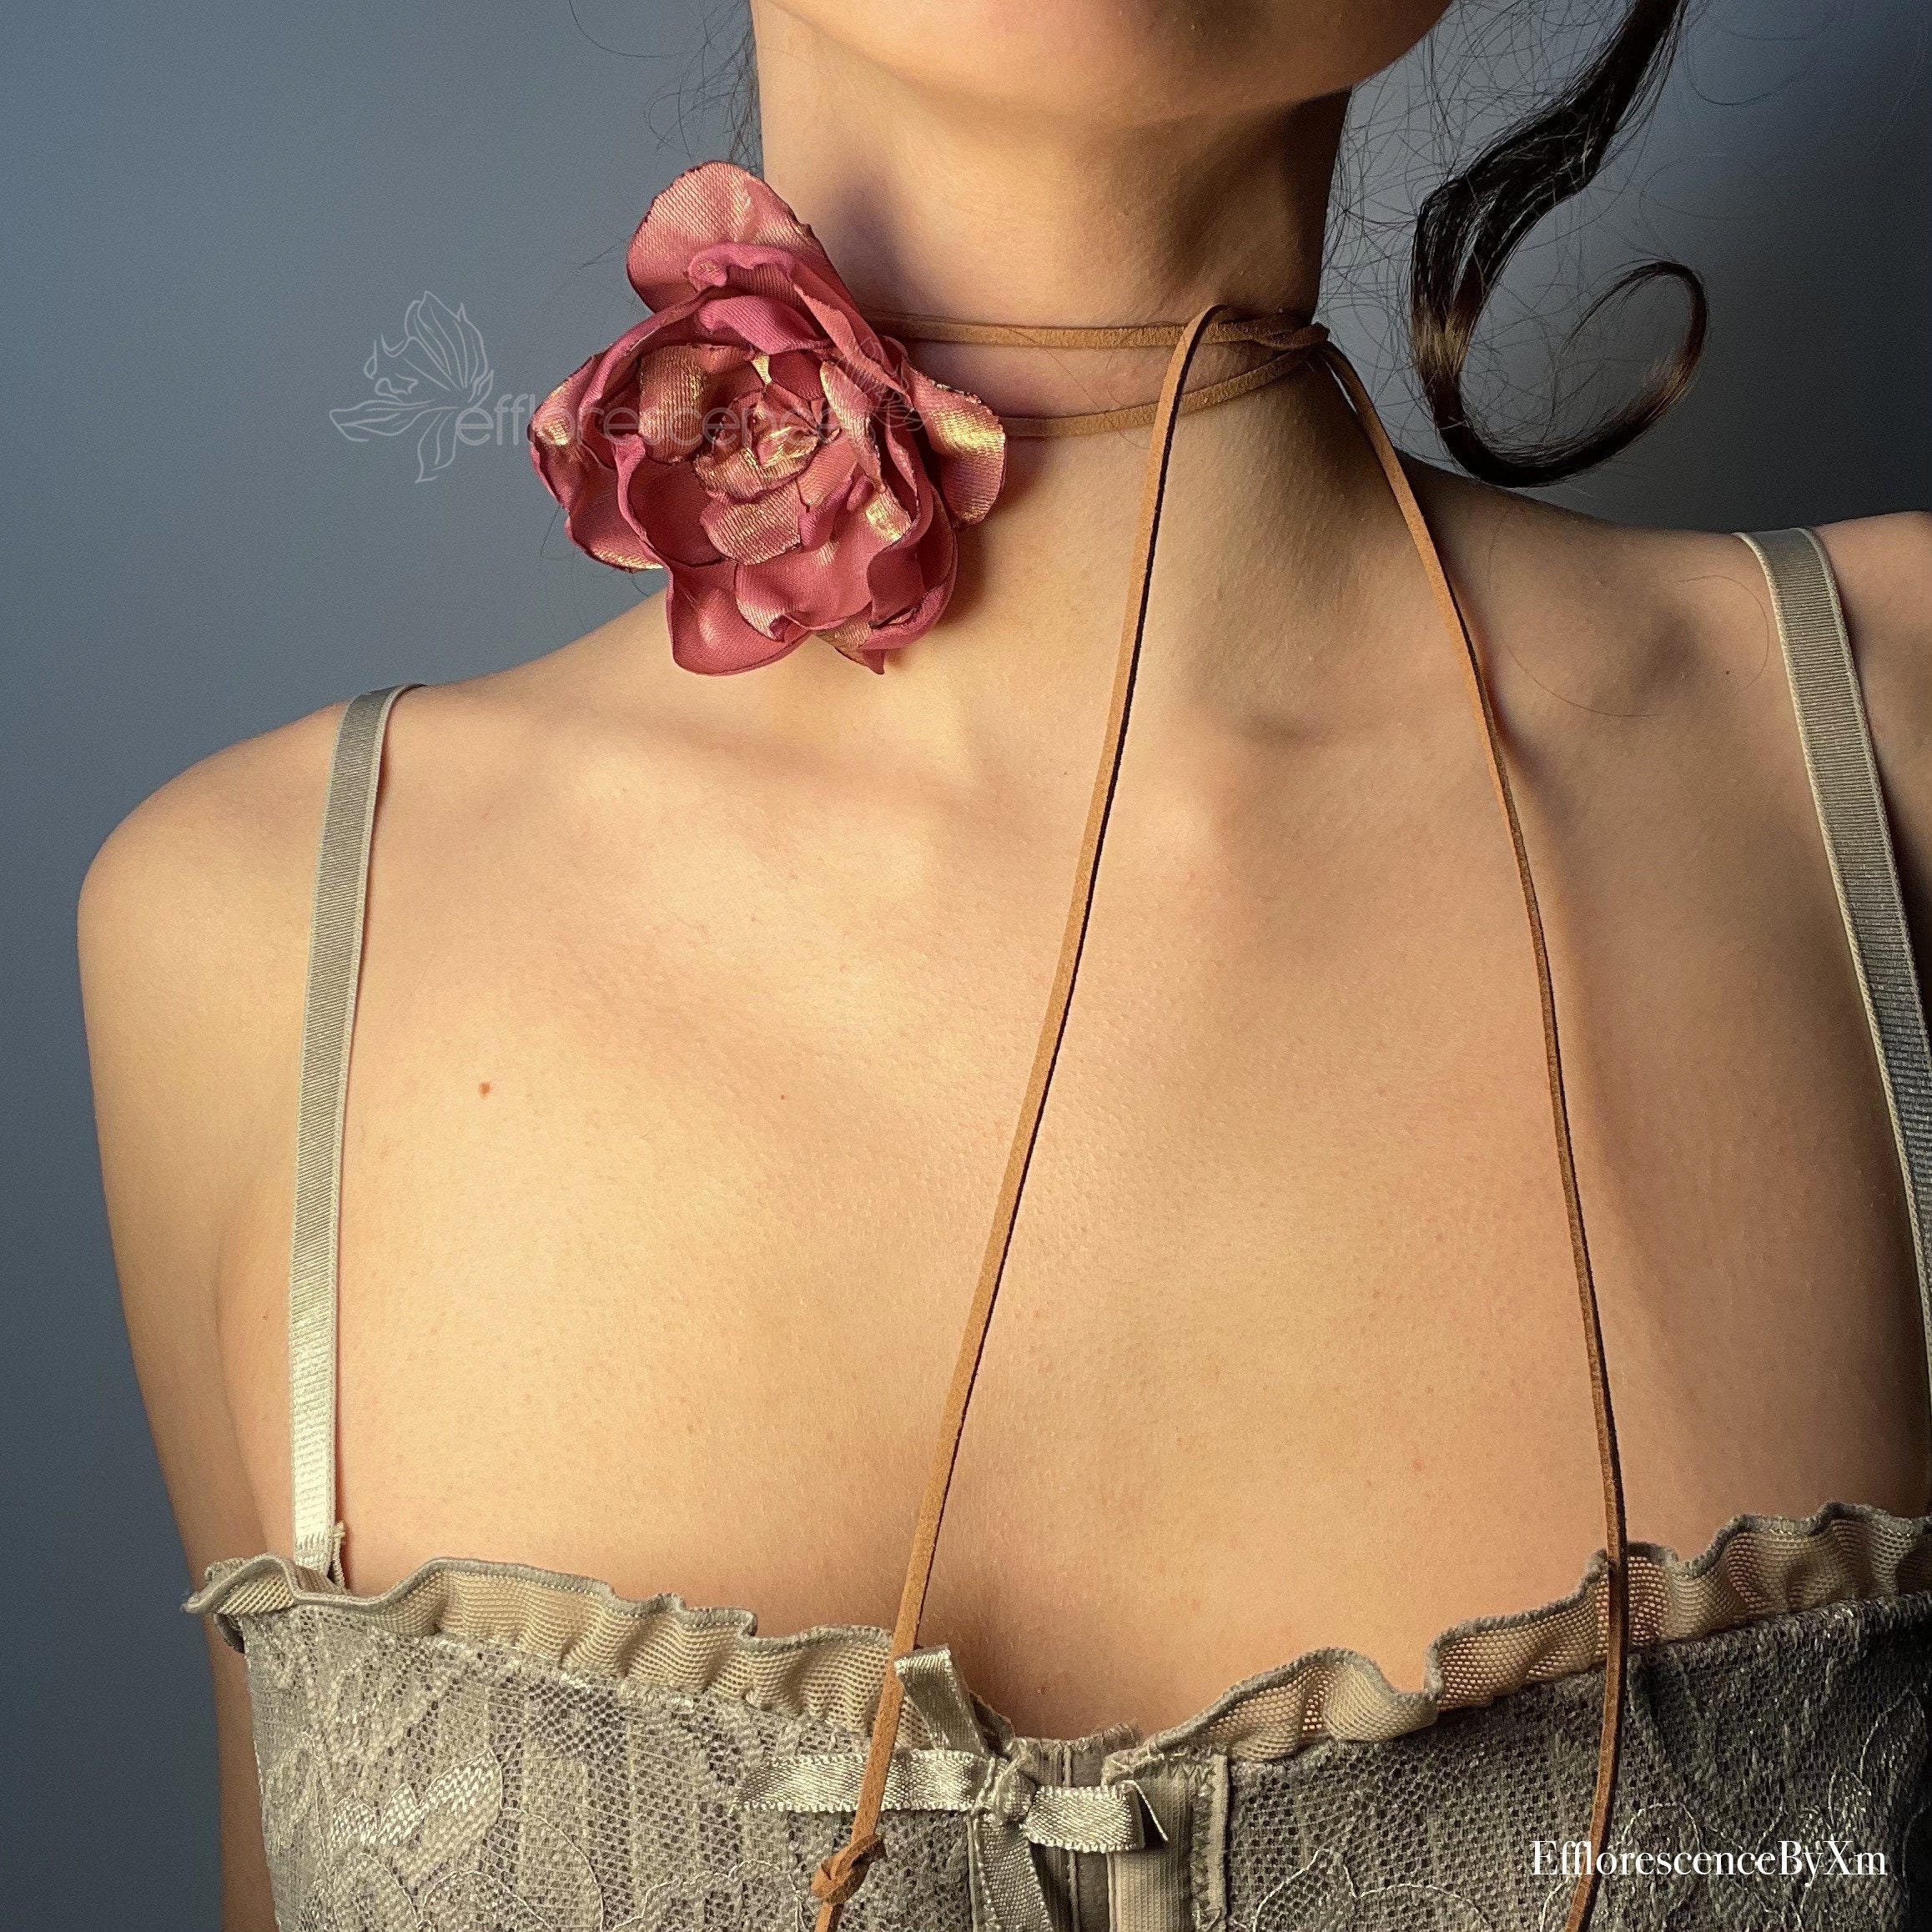 Iridescent Handmade Corsage Neck Flower in Pink With Gold - Etsy